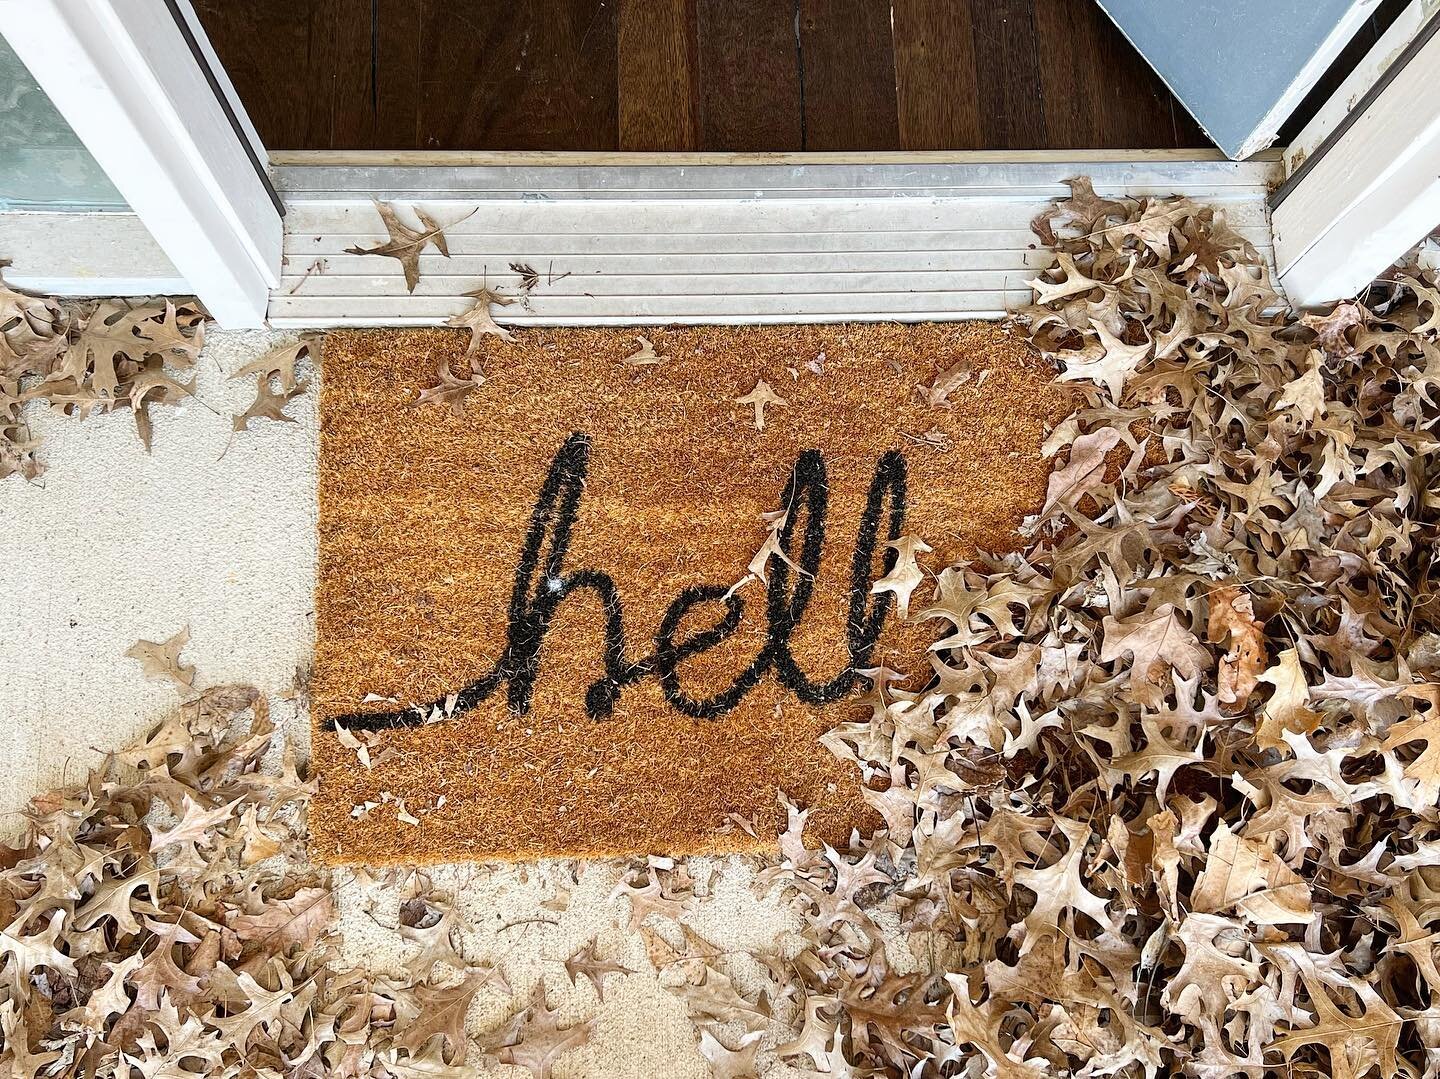 When Mom jokingly calls you demon dogs and the &ldquo;Hello&rdquo; doormat is suddenly covered in leaves to form an new sentiment.. 😈🍂

#doglife #arkansasliving #giantschnauzersofamerica #giantlife #giantschnauzerproblems #crazydogs #dogsofinstagra